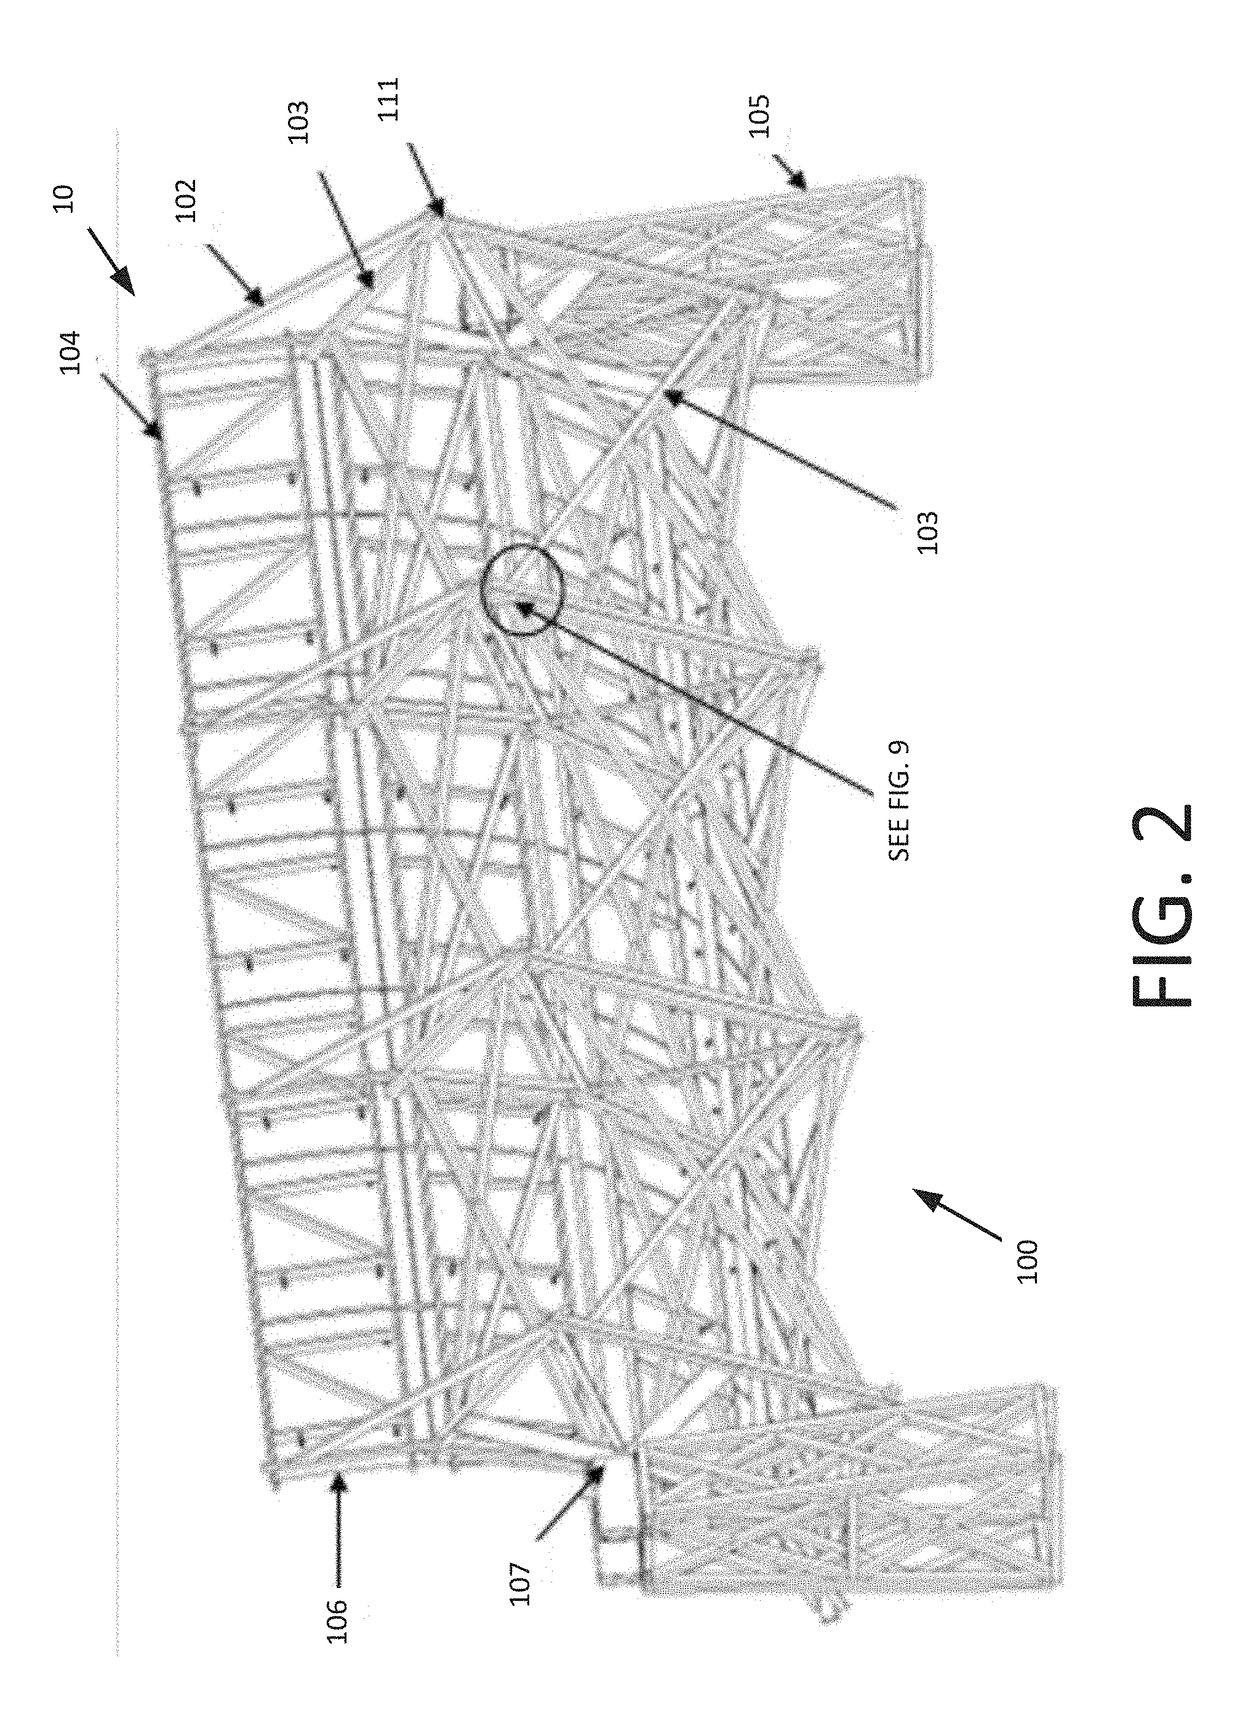 Spaceframe support structure for a solar collector